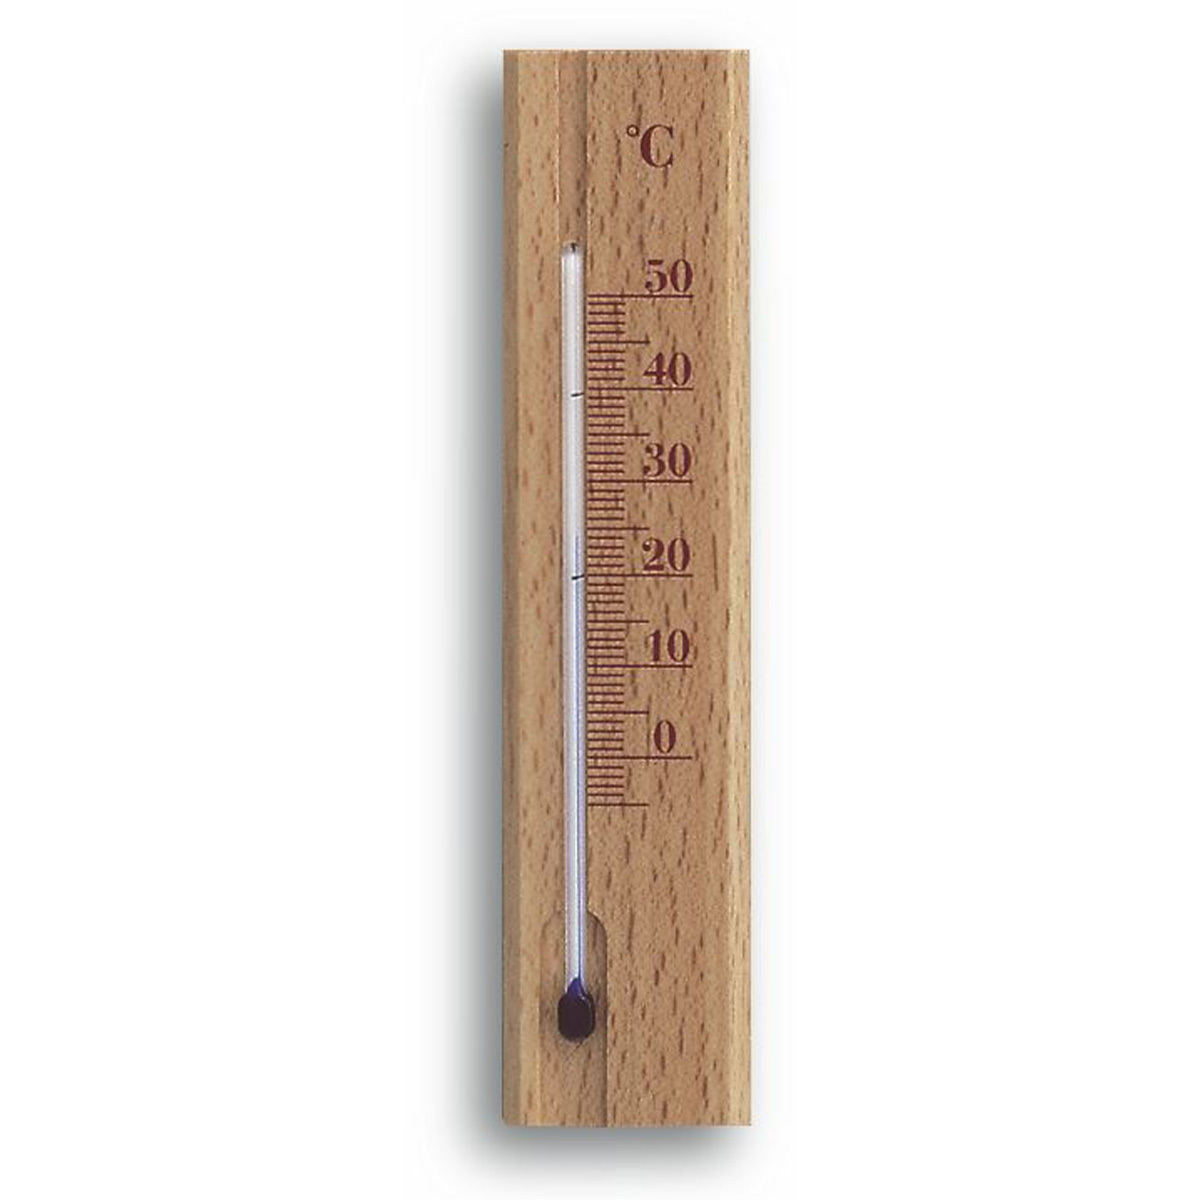 Zimmerthermometer Thermometer Innen Holz Thermometer Analog Raum